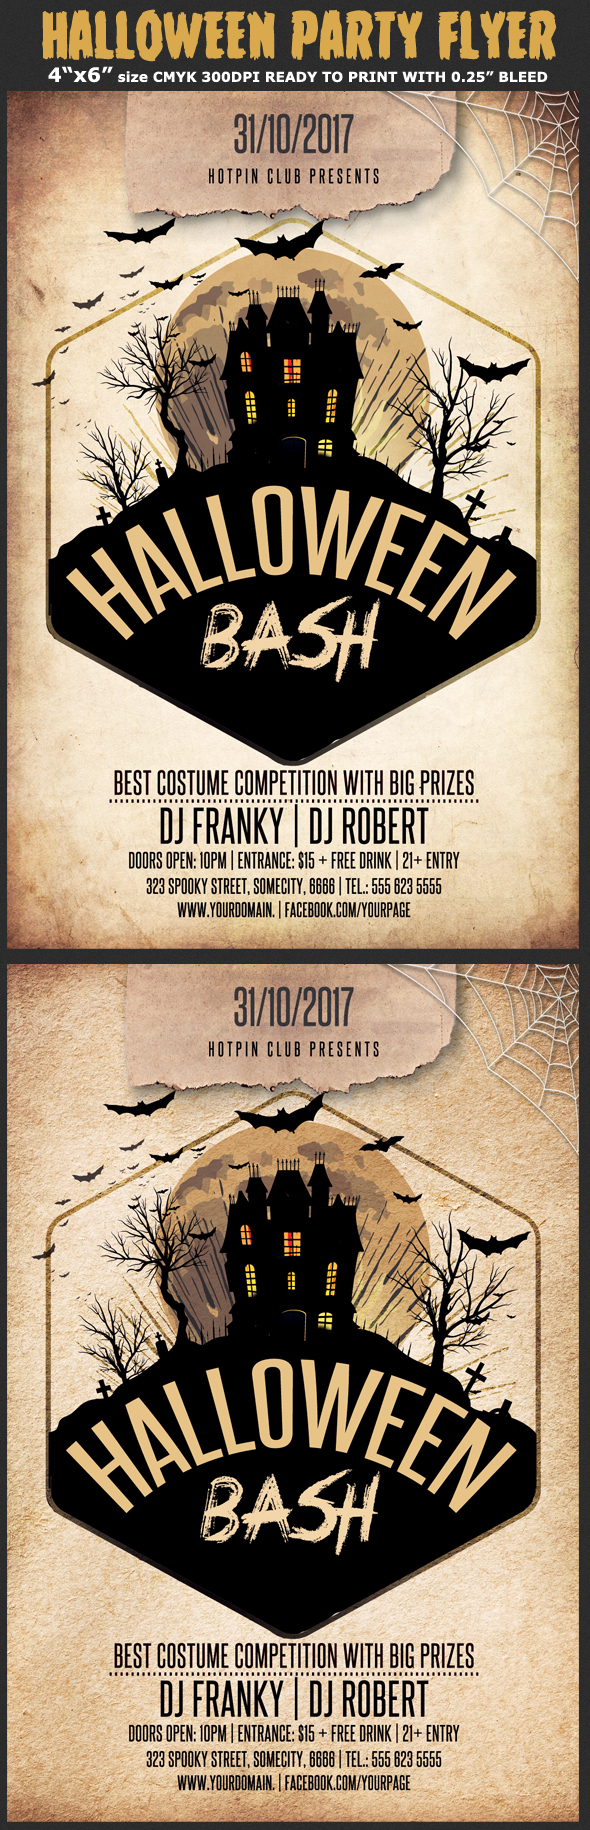 club costume party creepy dj Event flyer Halloween bash Halloween party haunted house